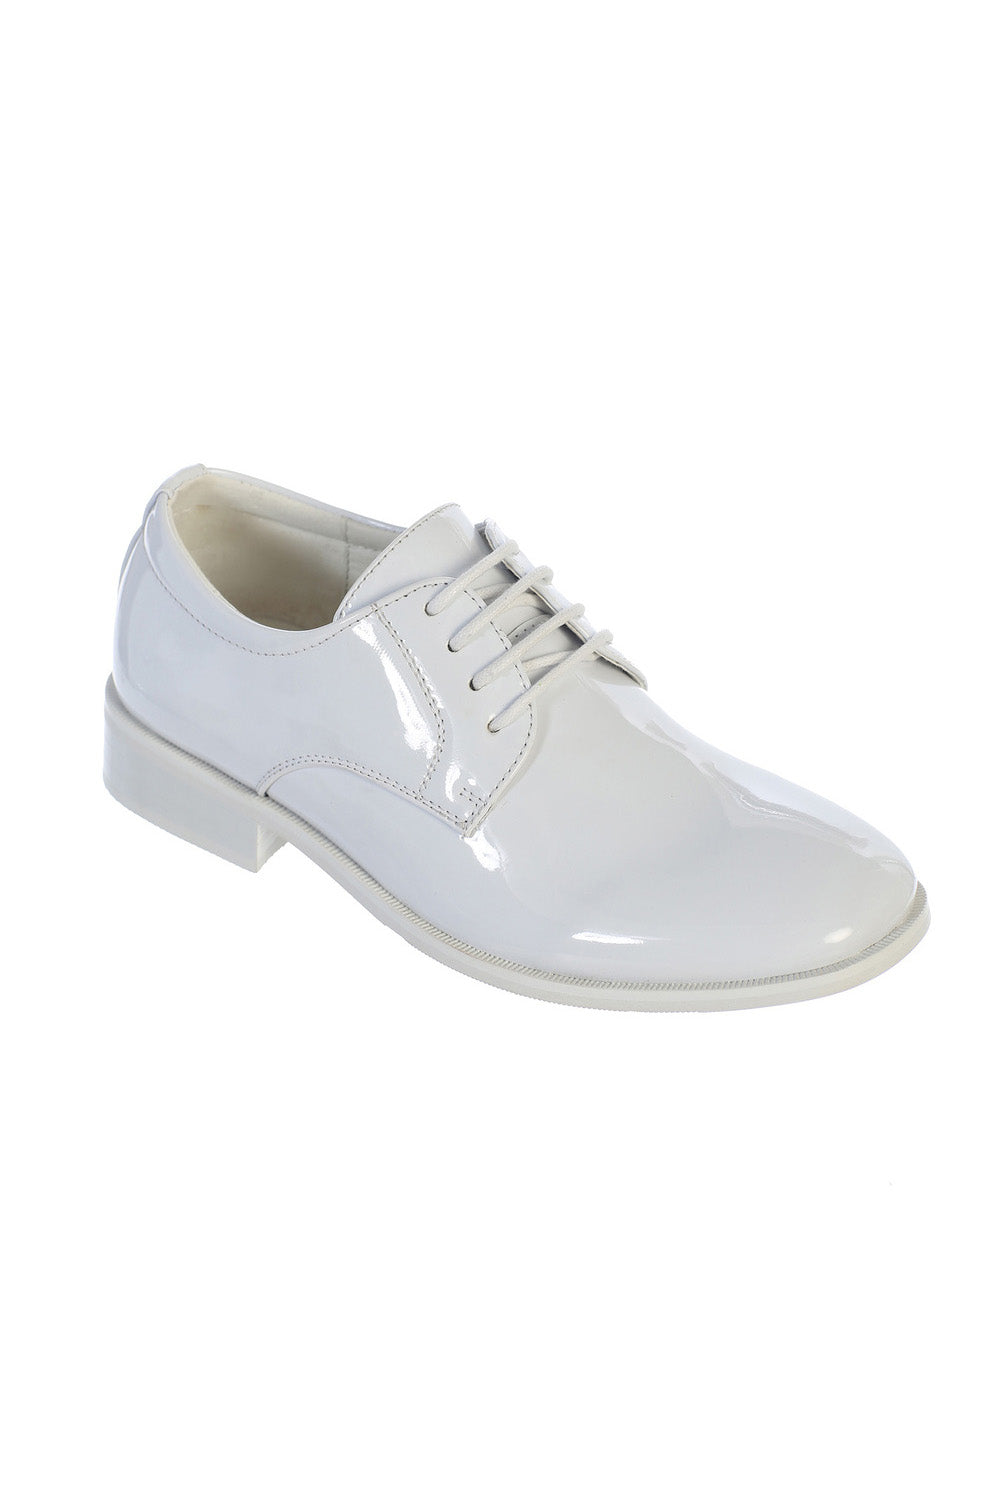 white shoes for kids